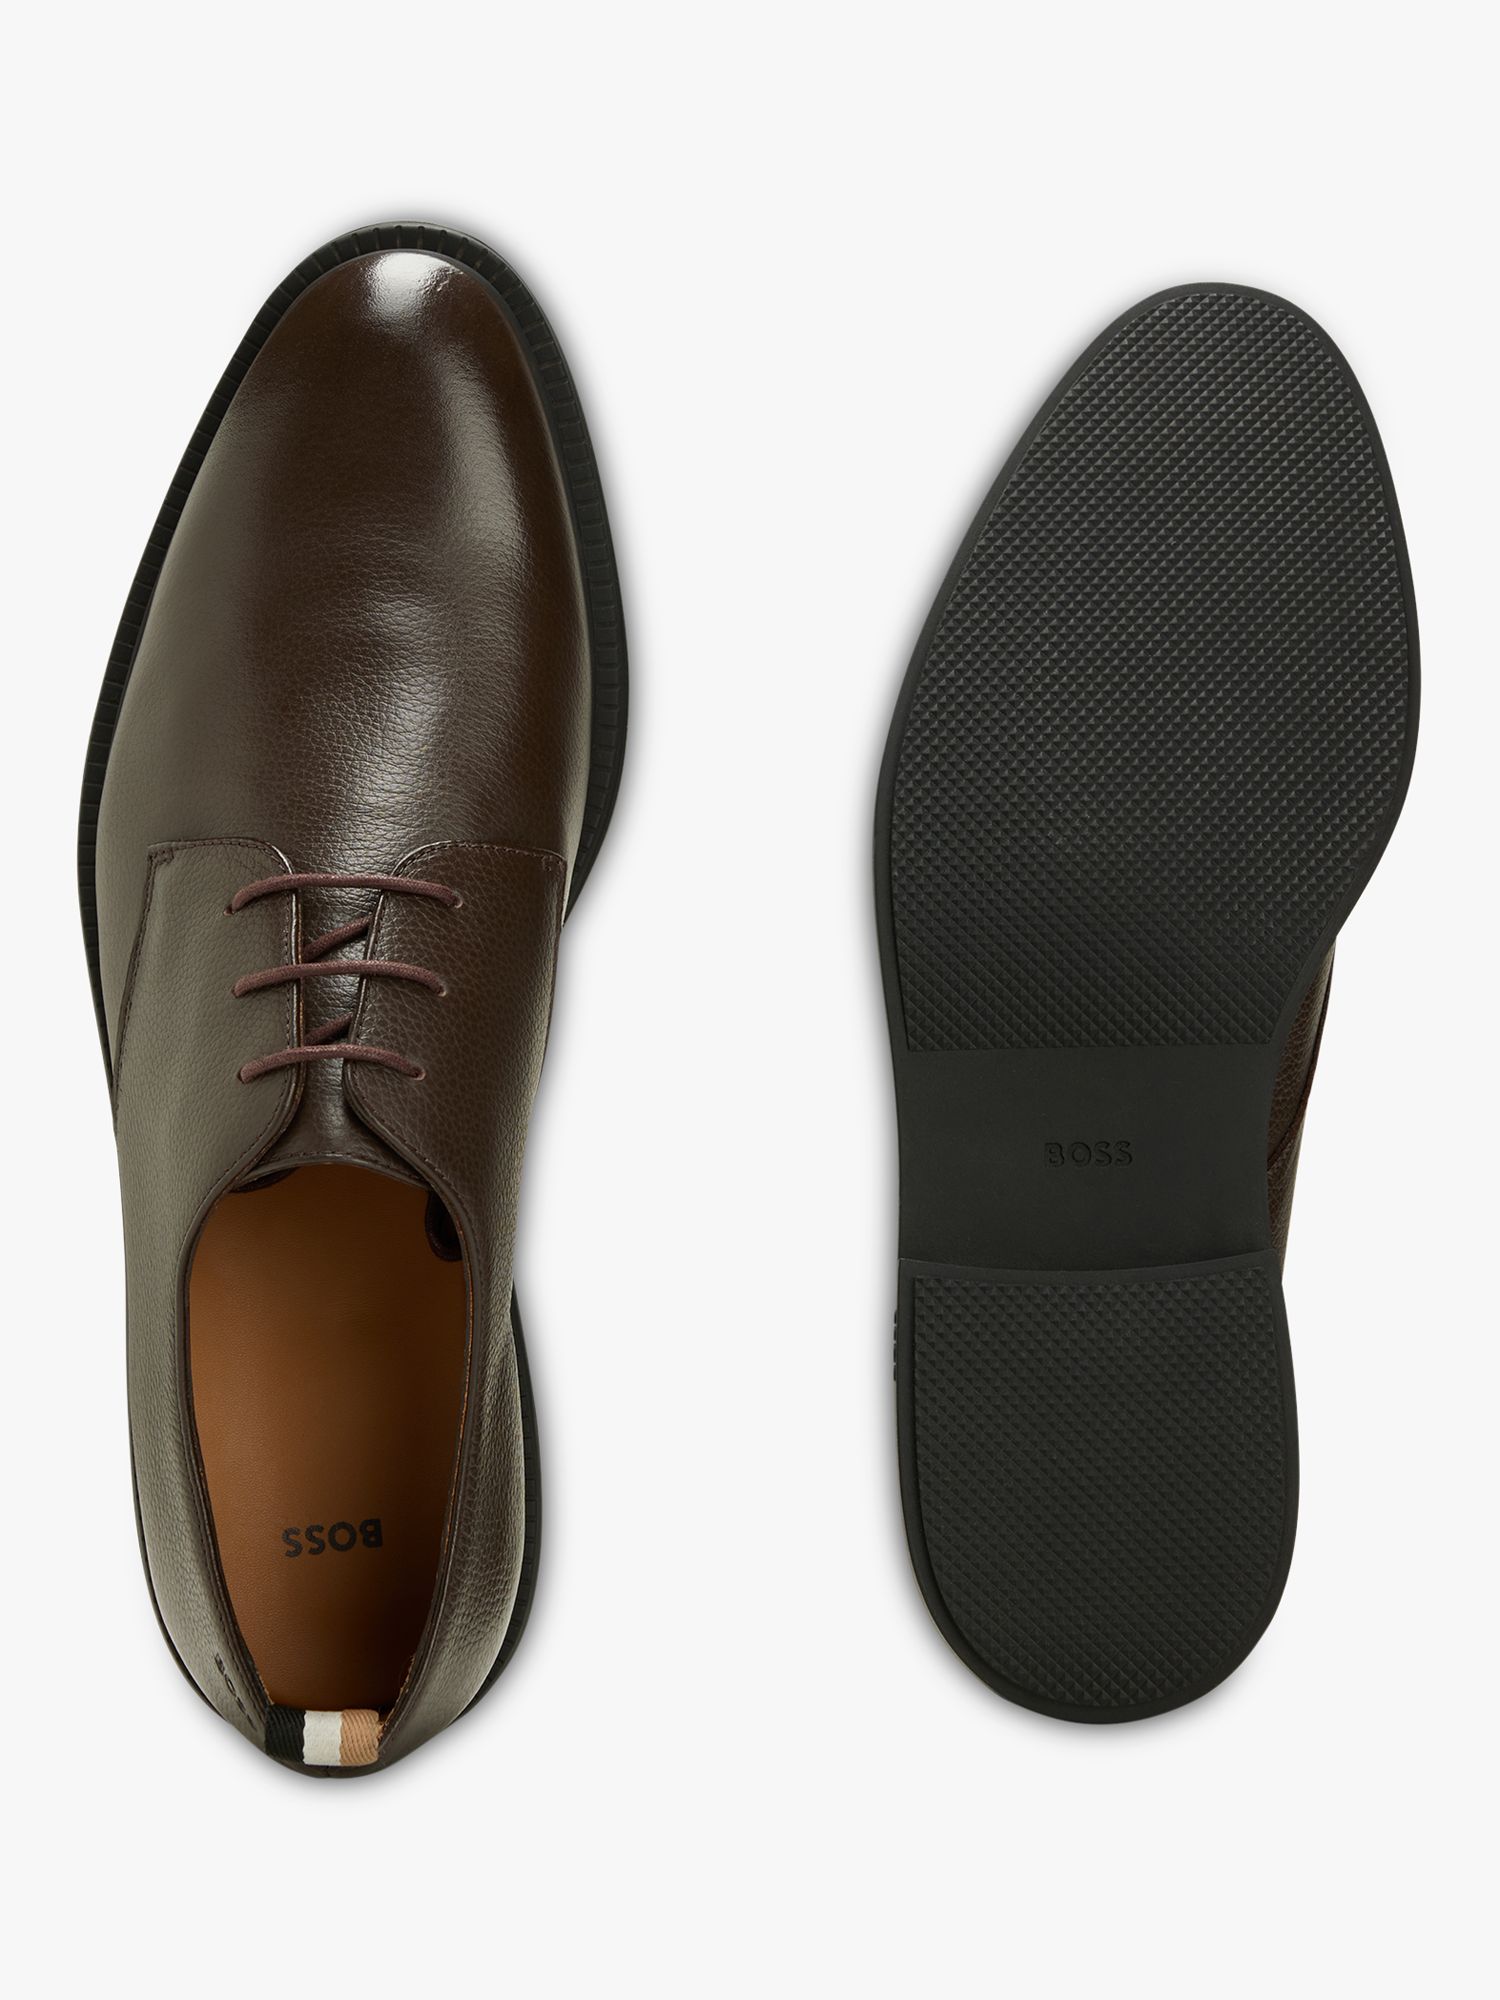 HUGO BOSS Leather Lace Up Derby Shoes, Brown at John Lewis & Partners